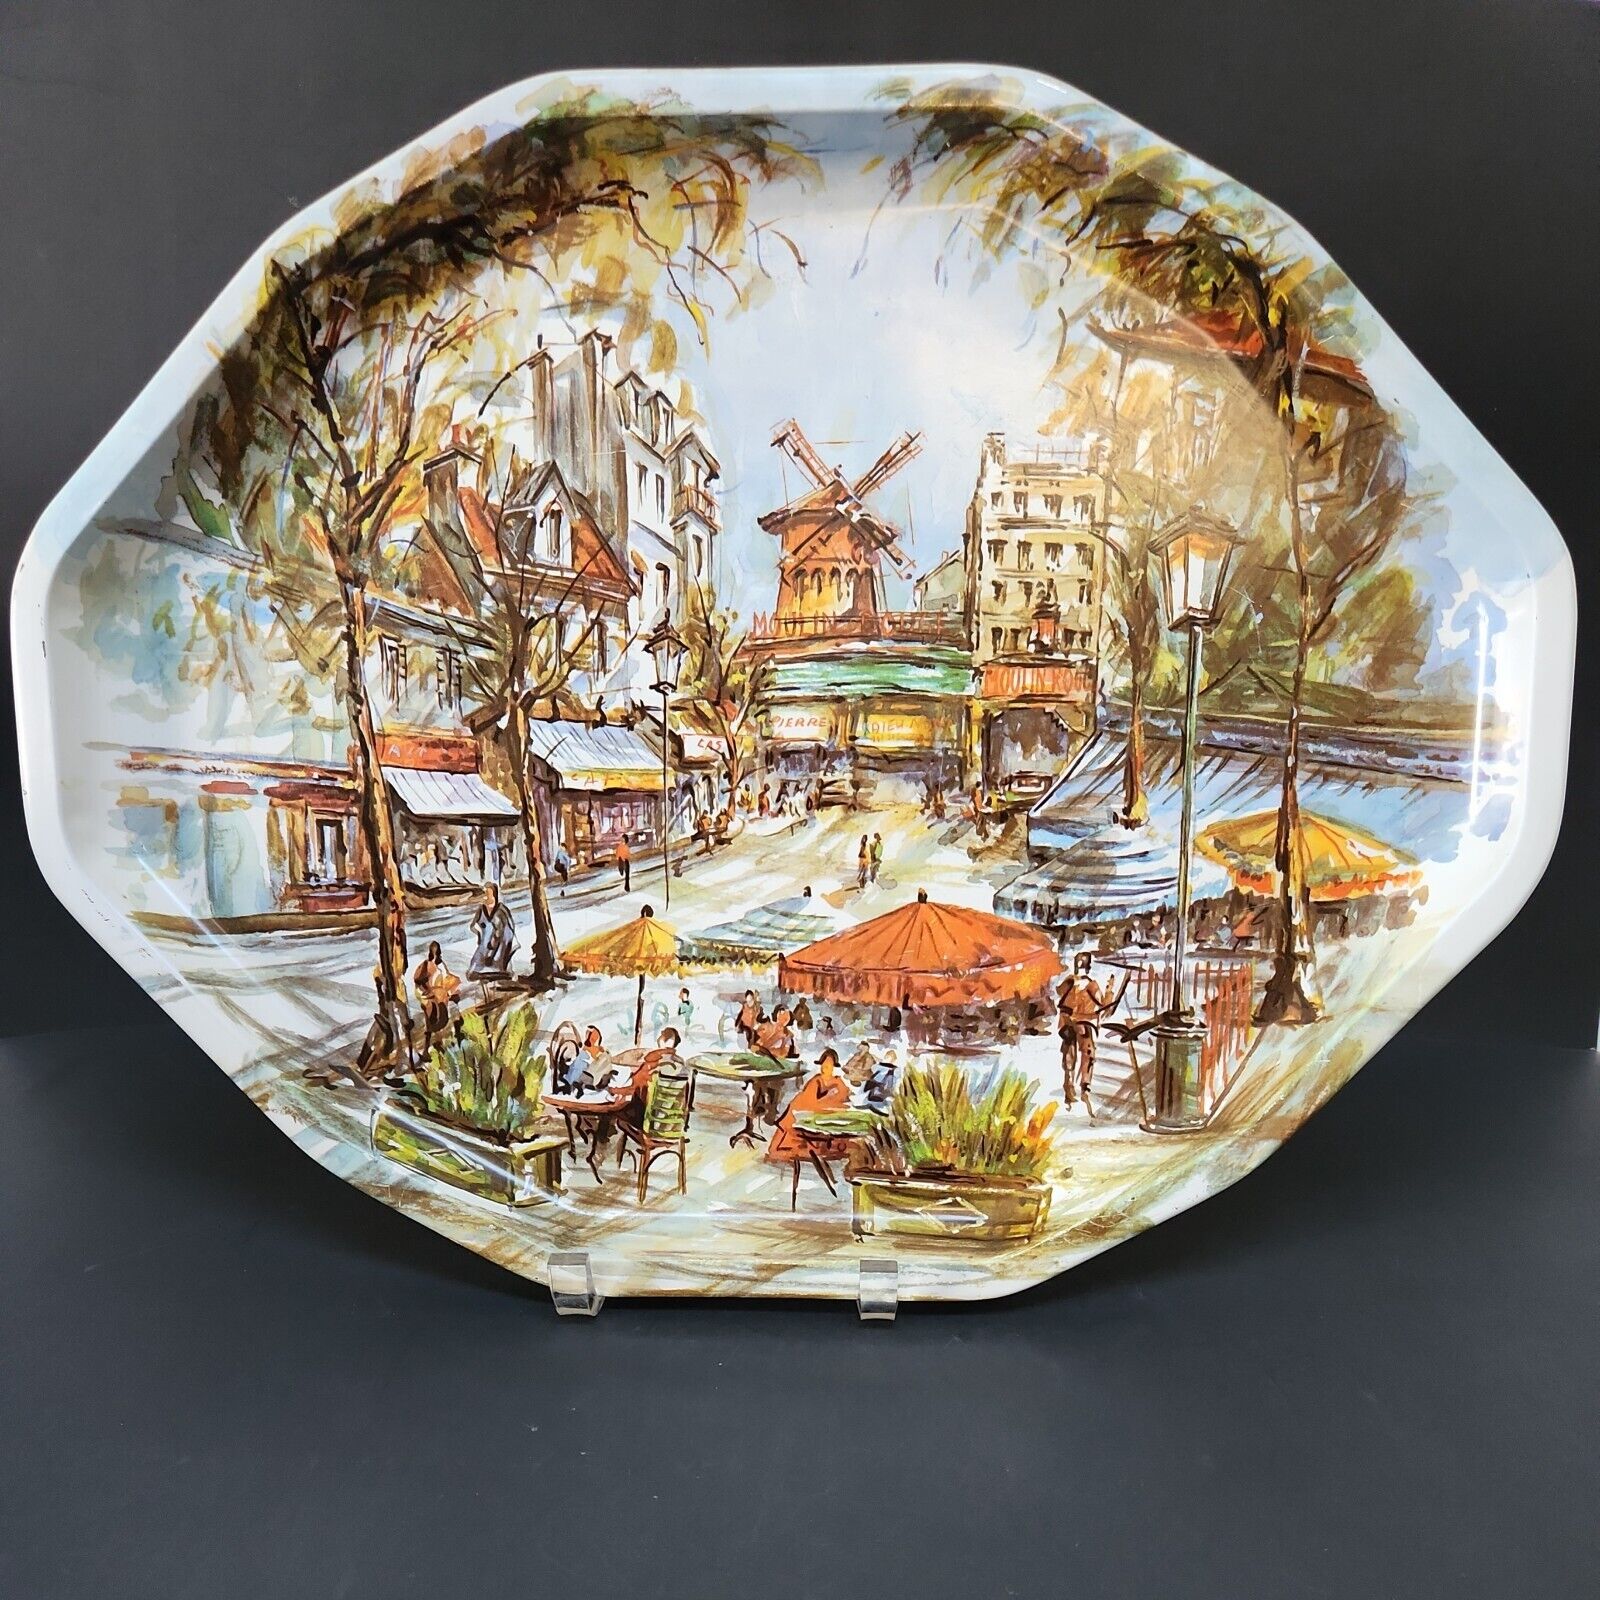 Vintage 1970s Daher Tray with City Scene of Paris - Colorful, Large Autumn Tray